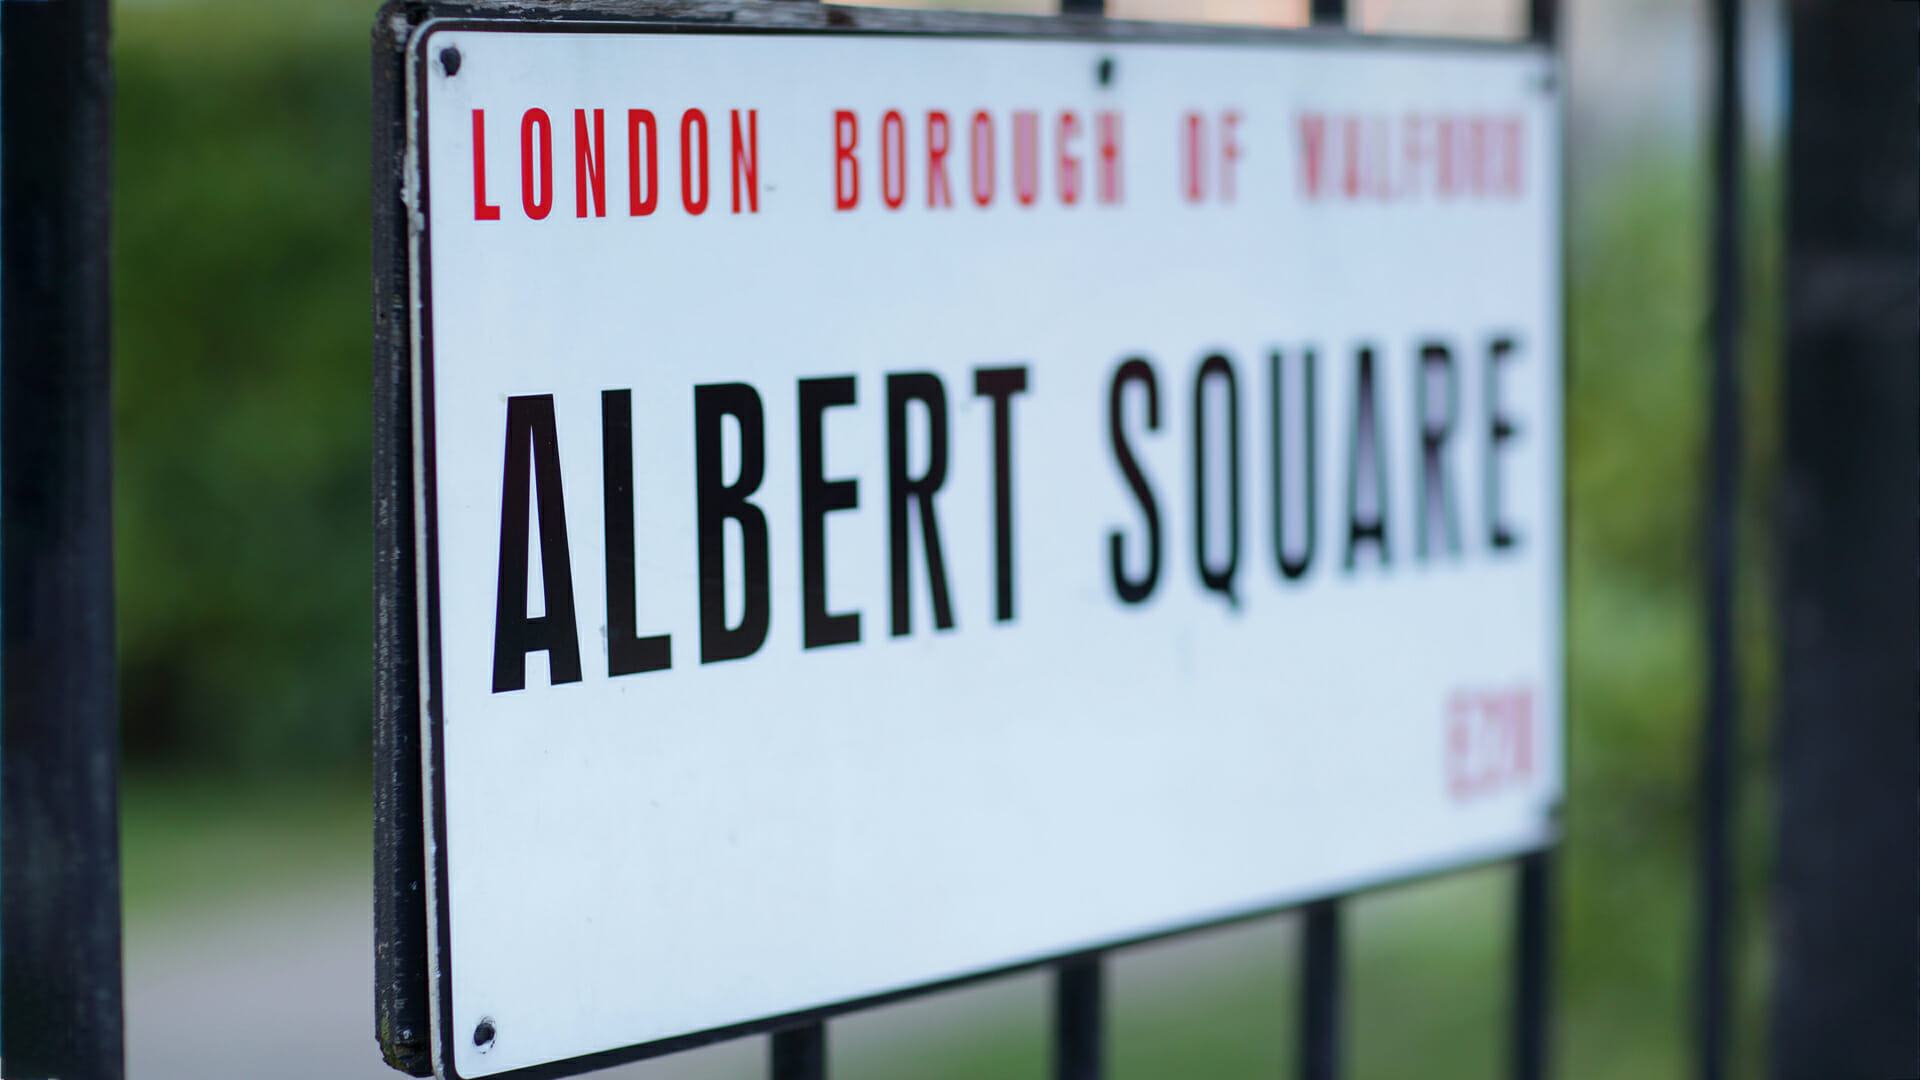 EastEnders legend set for exit after 38 years